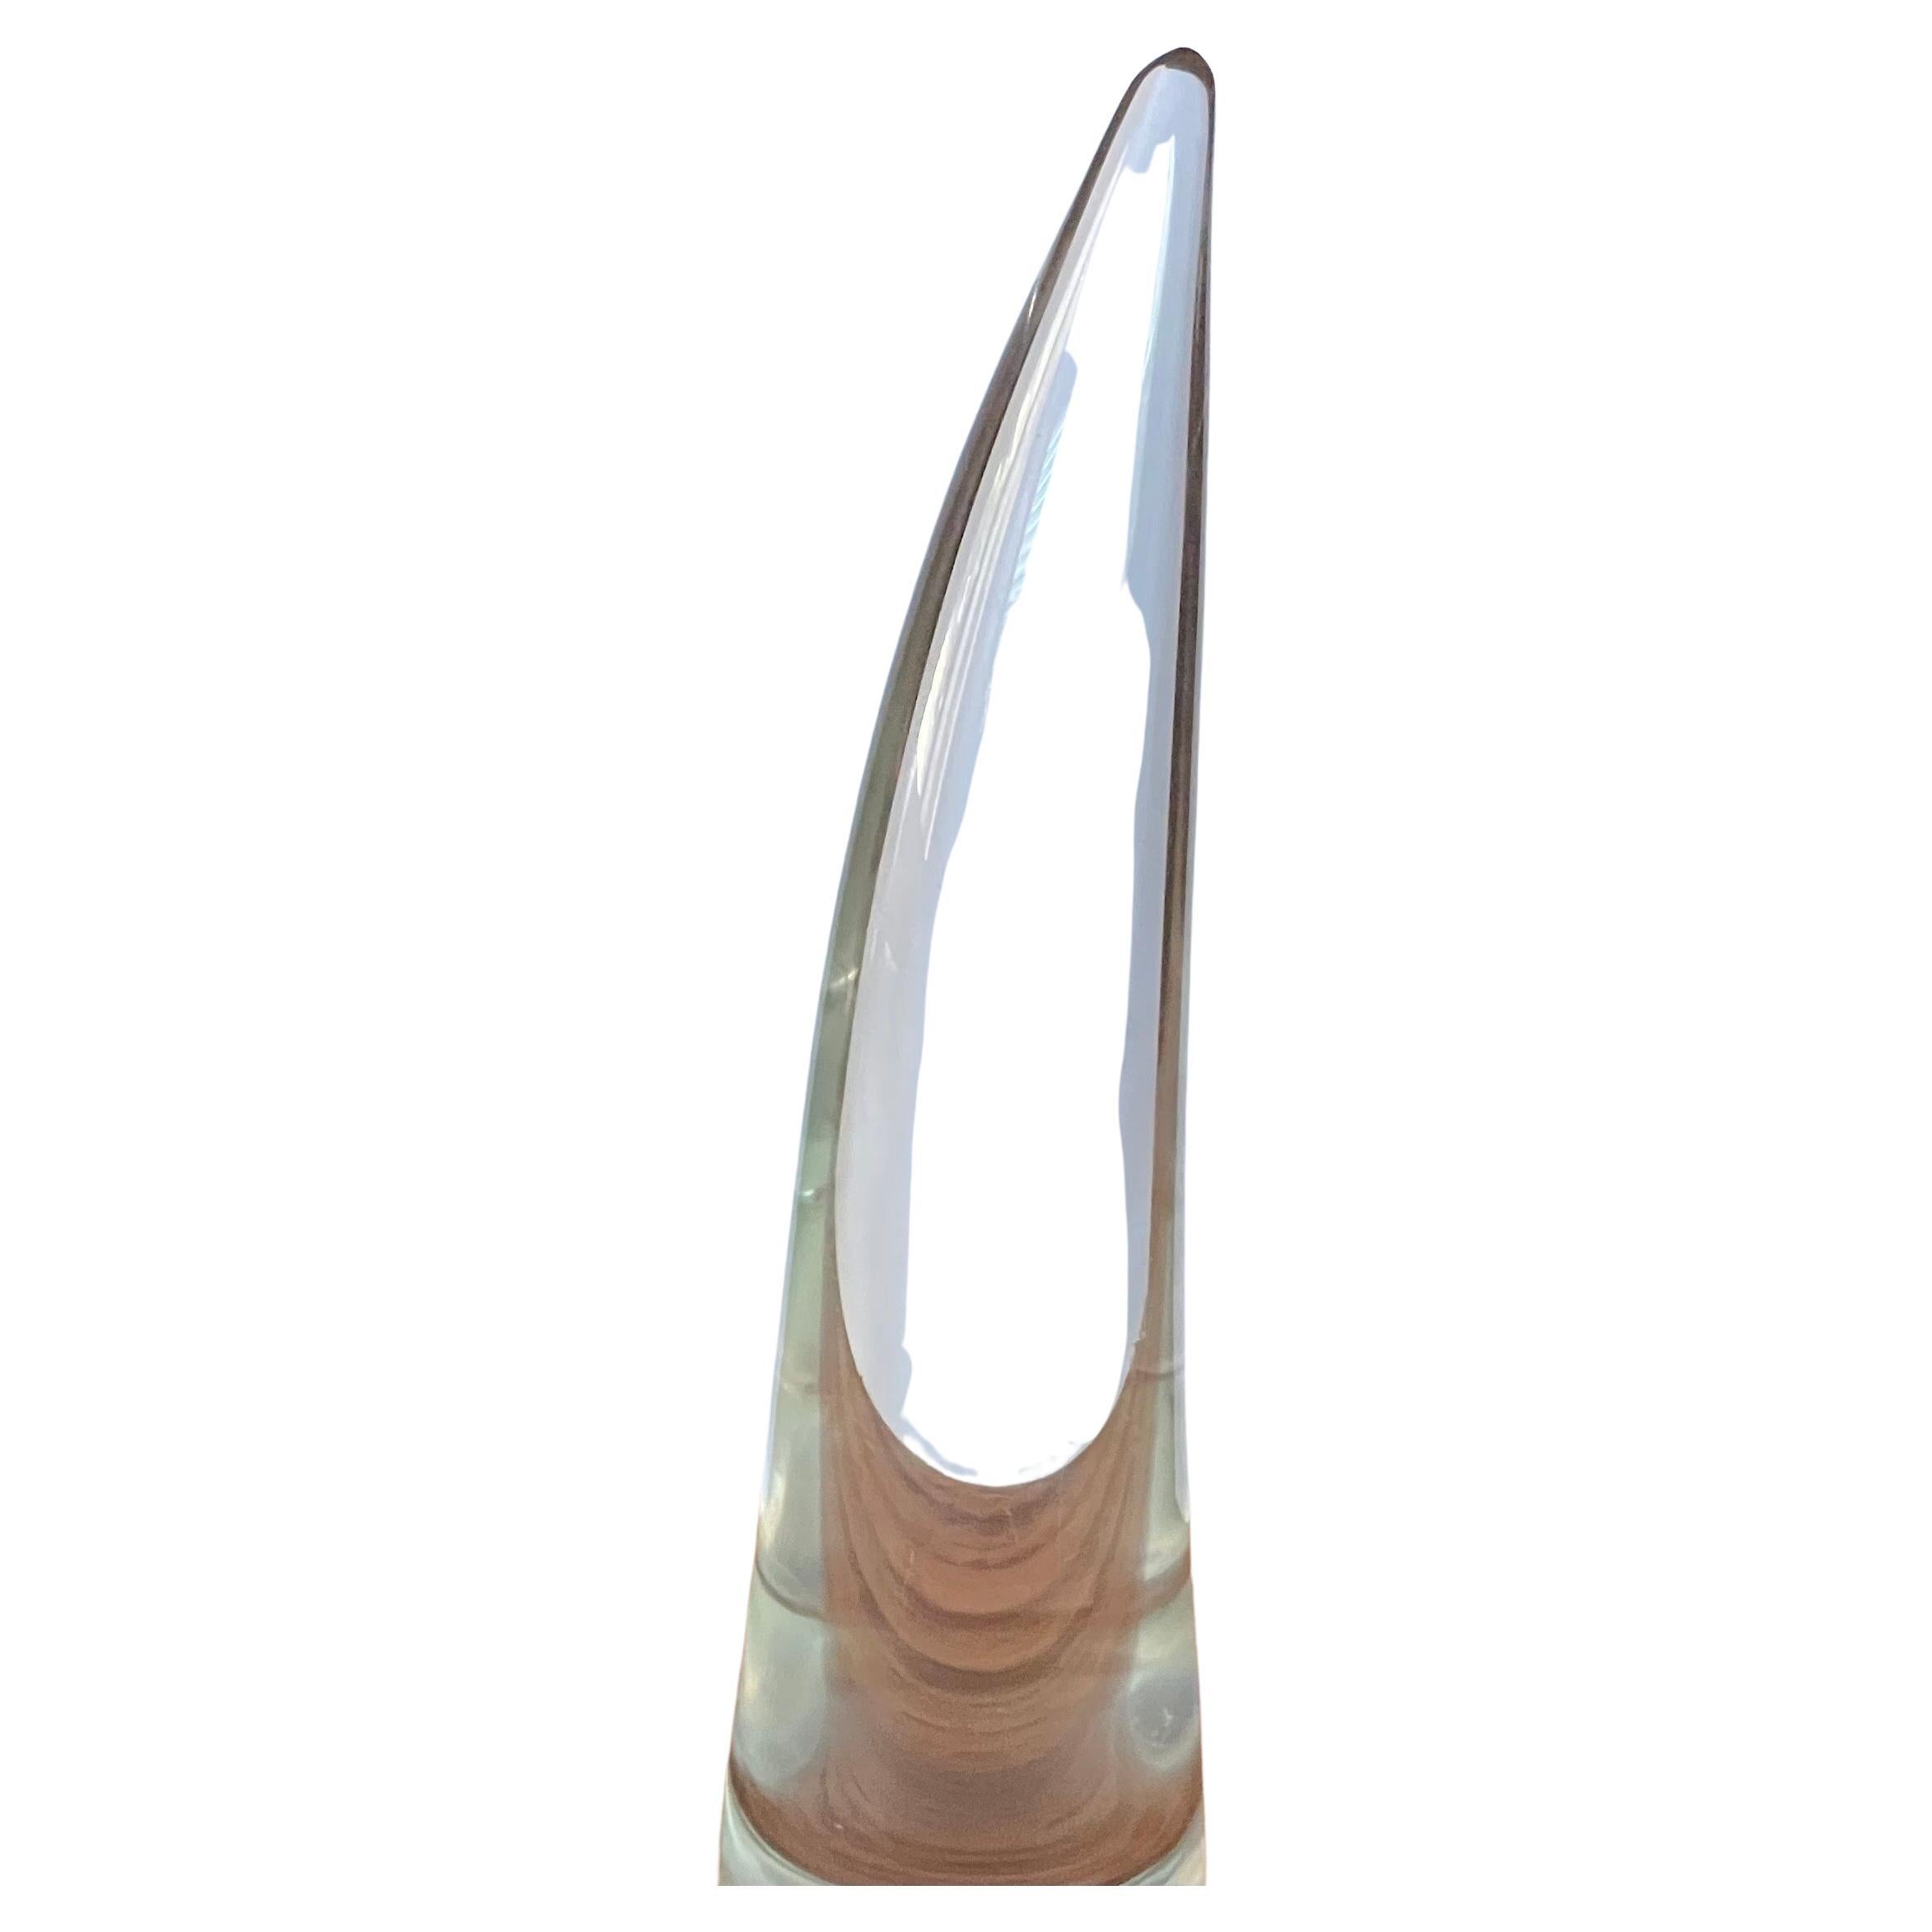 Gorgeous large art glass horn by Licio Zanetti for Murano Glass Studios, circa 1970s. The horn measures 3